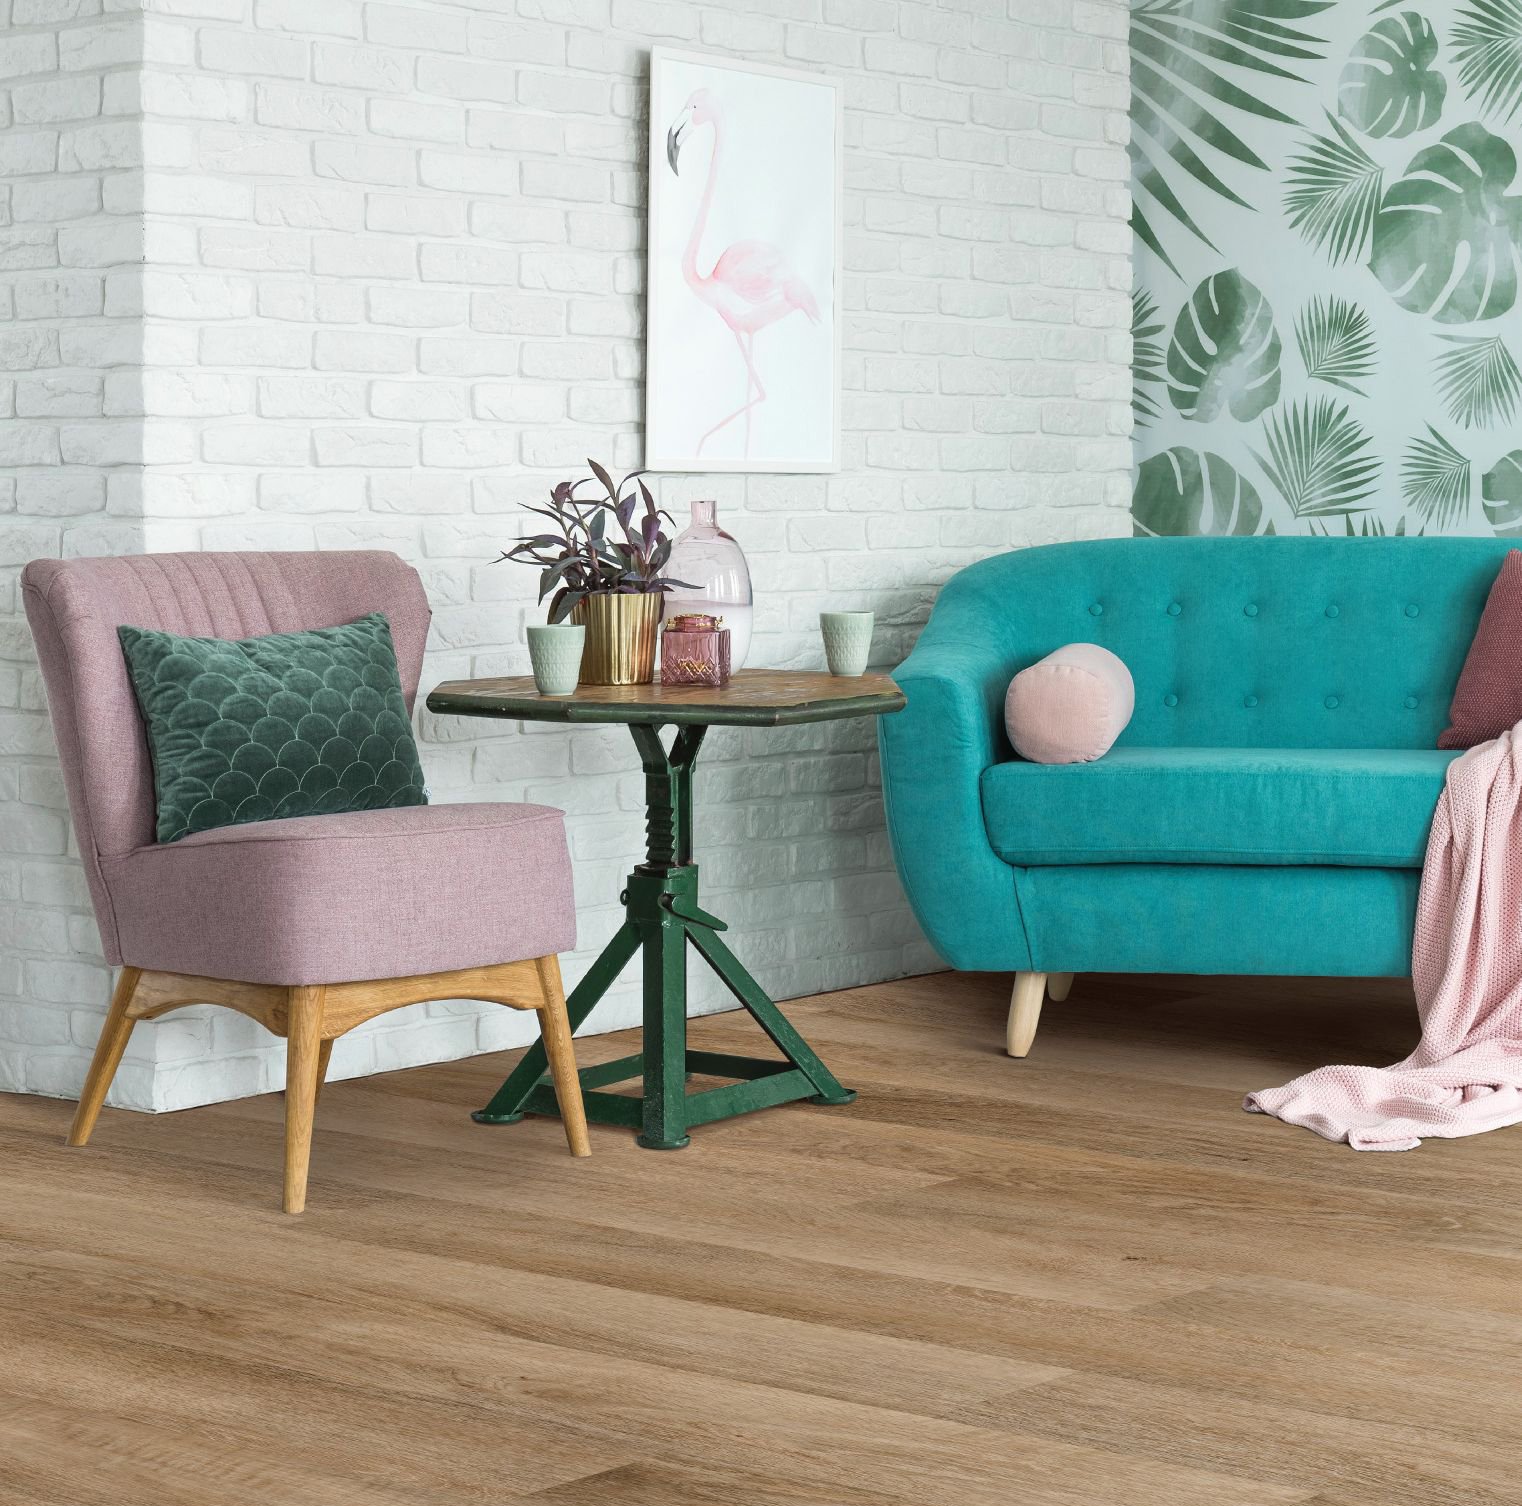 pink arm chair and teal couch on wood look flooring - Carpet Plus Flooring LLC